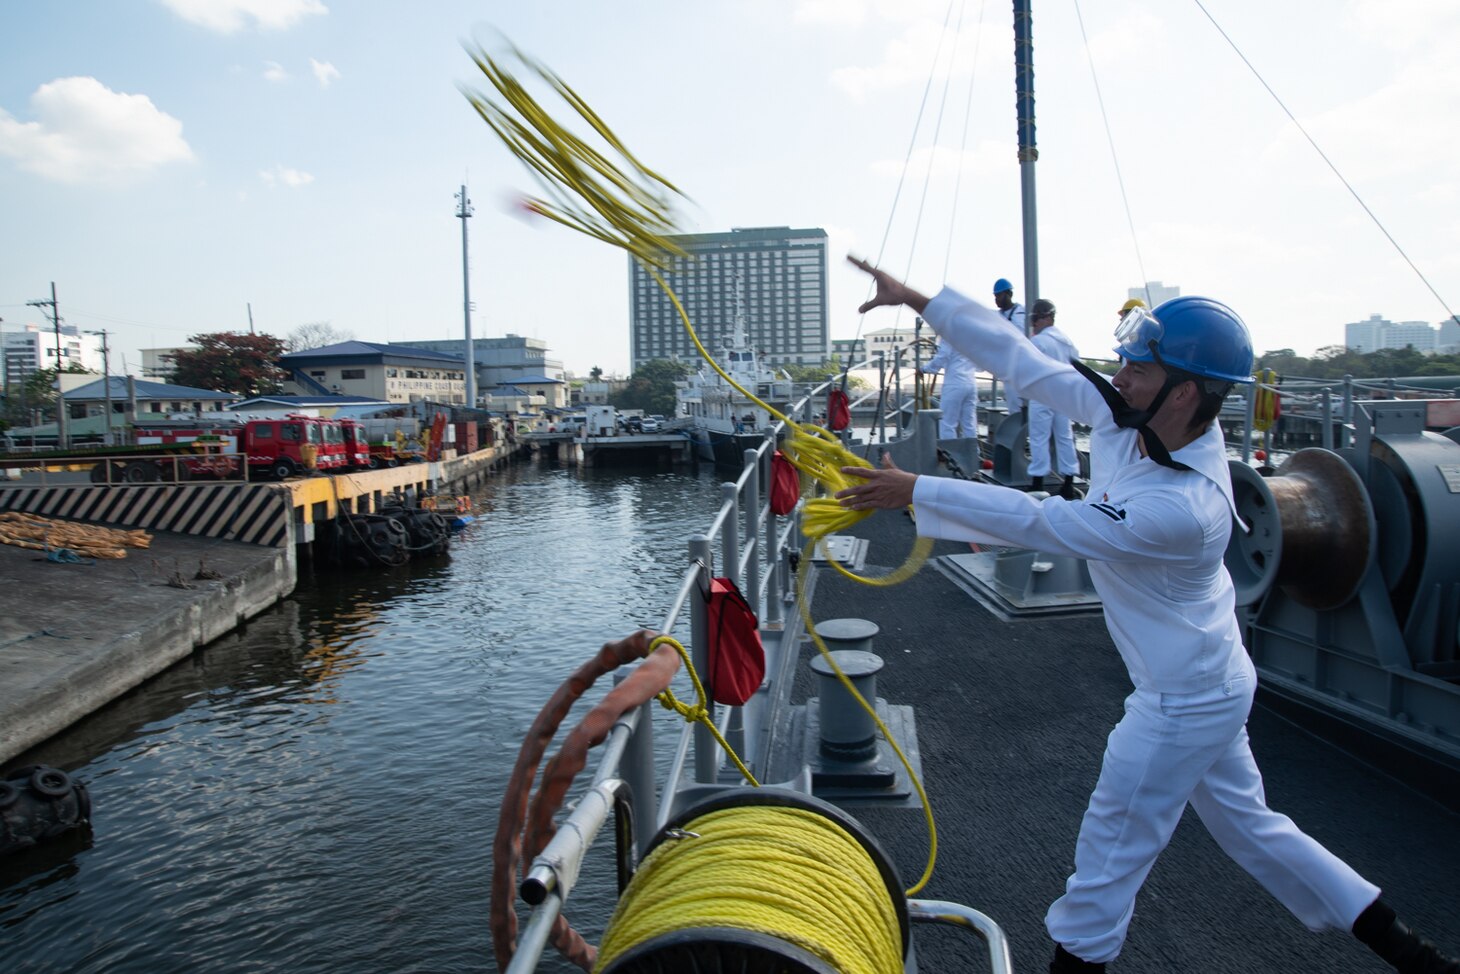 MANILA, Philippines (March 17, 2019) Mineman Seaman Logan Hardy, from Millbrook, Alabama, throws a messenger line to the pier to moor the Avenger-class mine countermeasures ship USS Chief (MCM 14) as the ship arrives in Manila, Philippines, for a port visit. Chief is visiting Manila while operating in the U.S. 7th Fleet area of operations to work with their Philippine Navy counterparts to strengthen regional security and stability, and enhance interoperability.